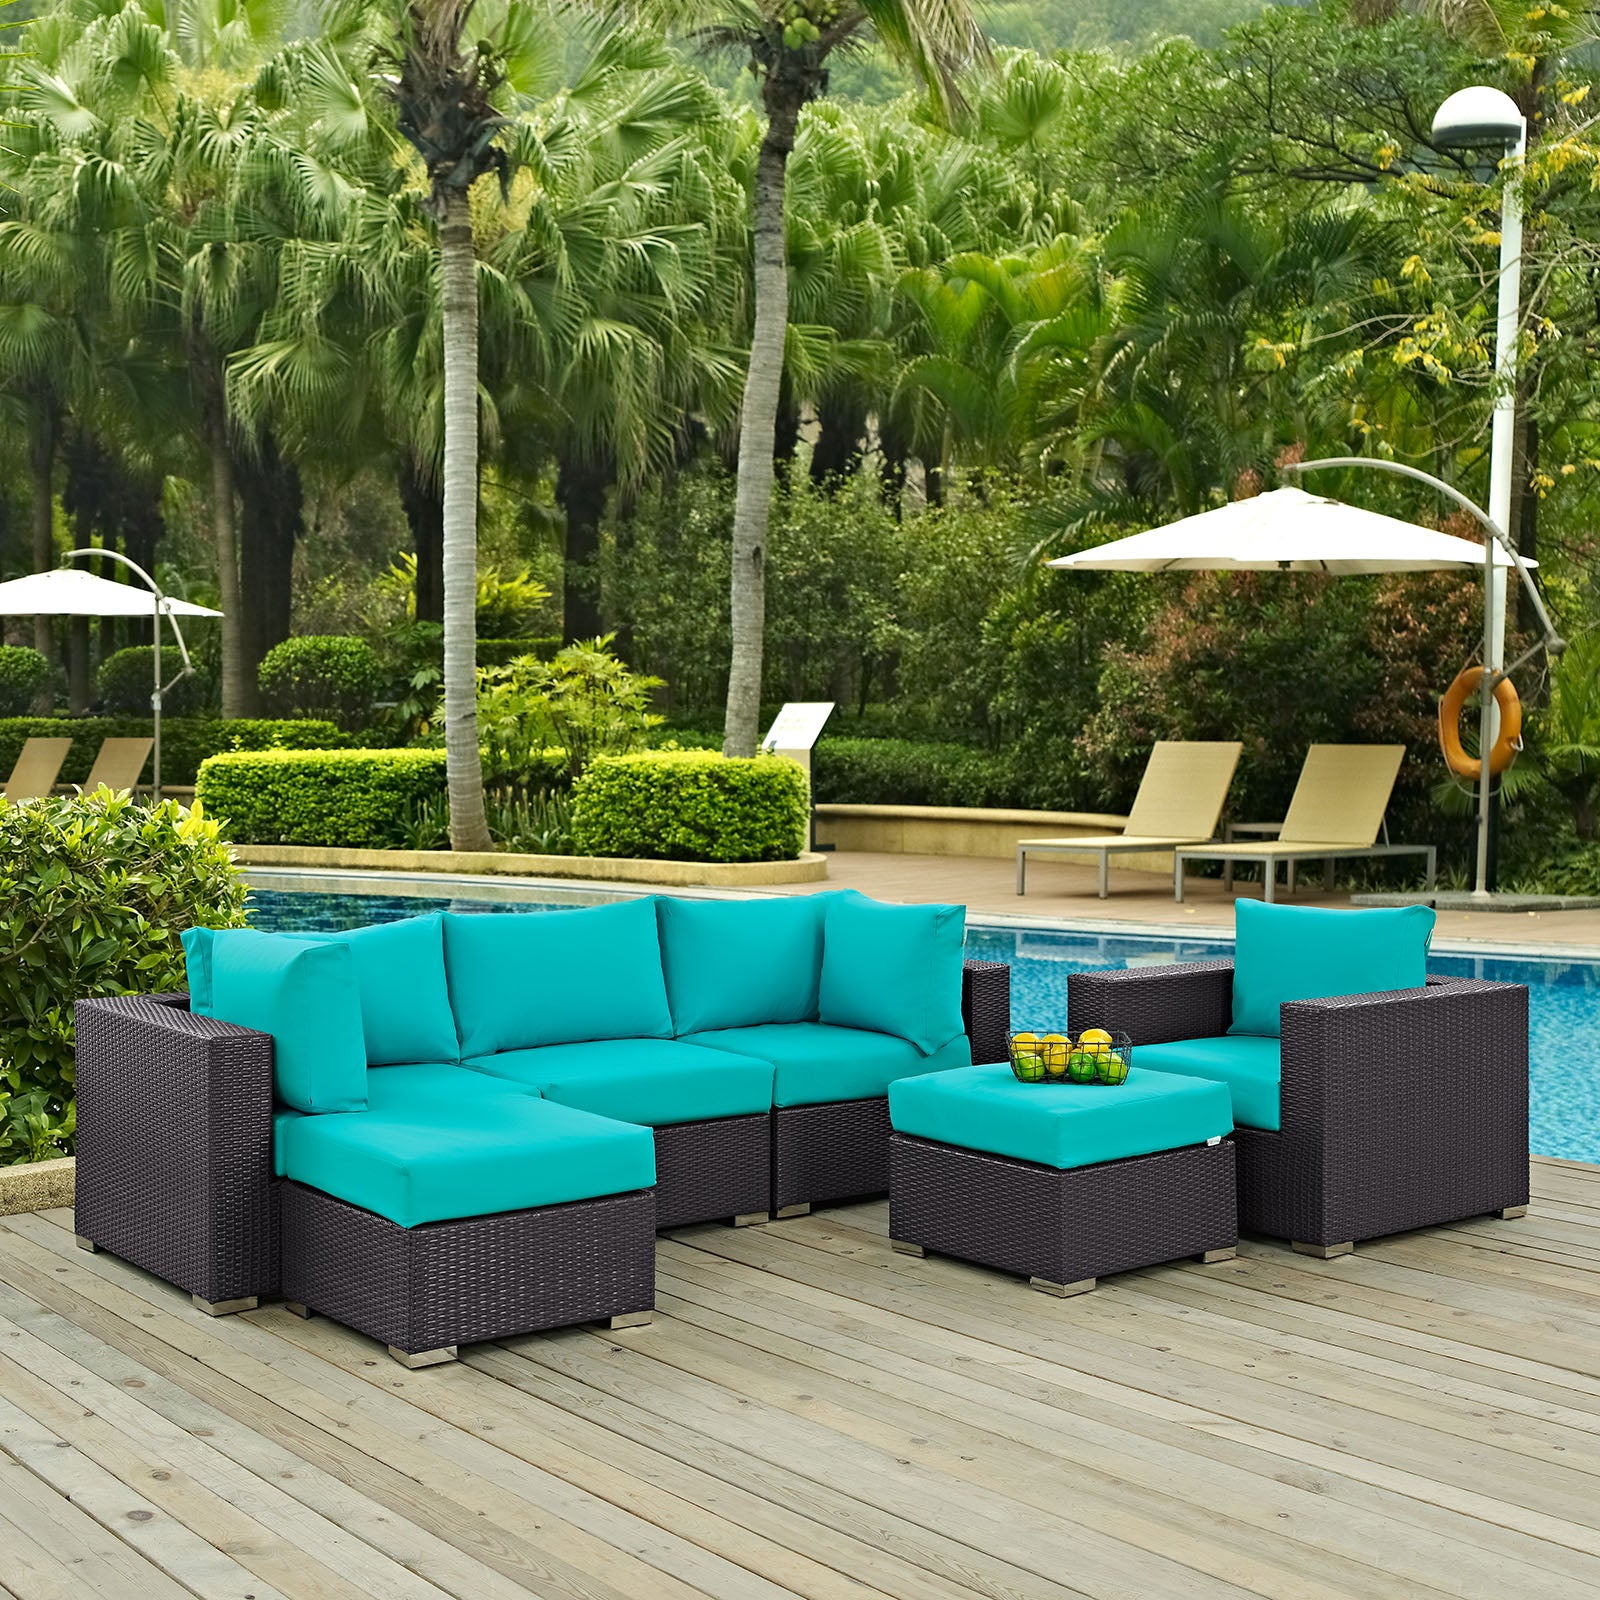 Modway Outdoor Conversation Sets - Convene 6 Piece Outdoor Patio Sectional Set Turquoise